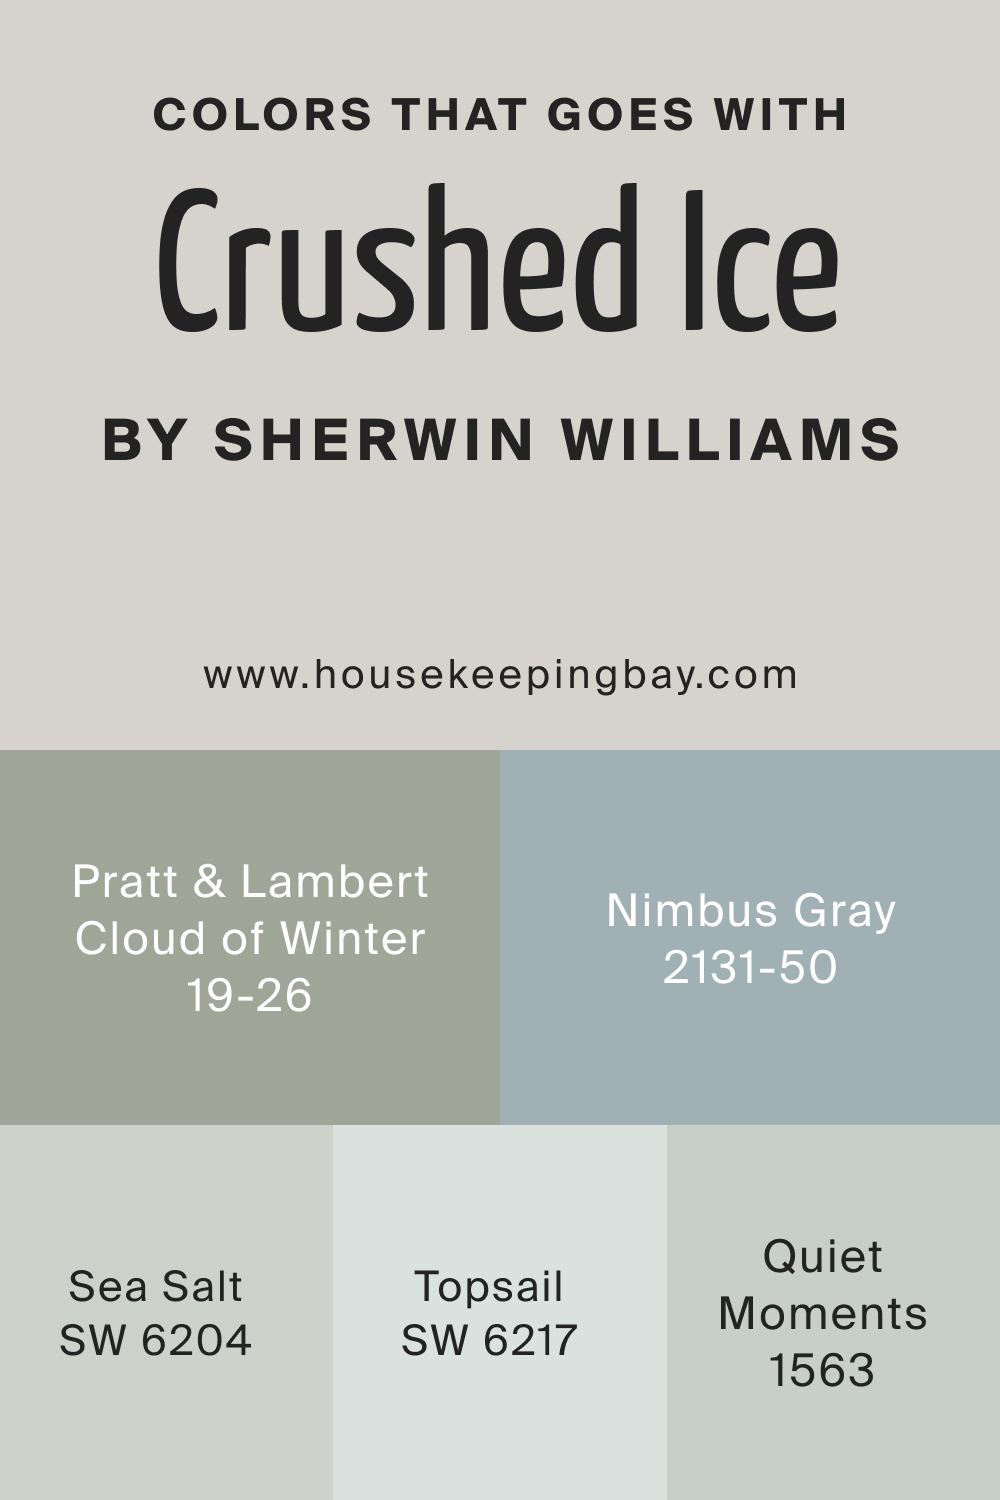 Colors that goes with Crushed Ice SW 7647 by Sherwin Williams